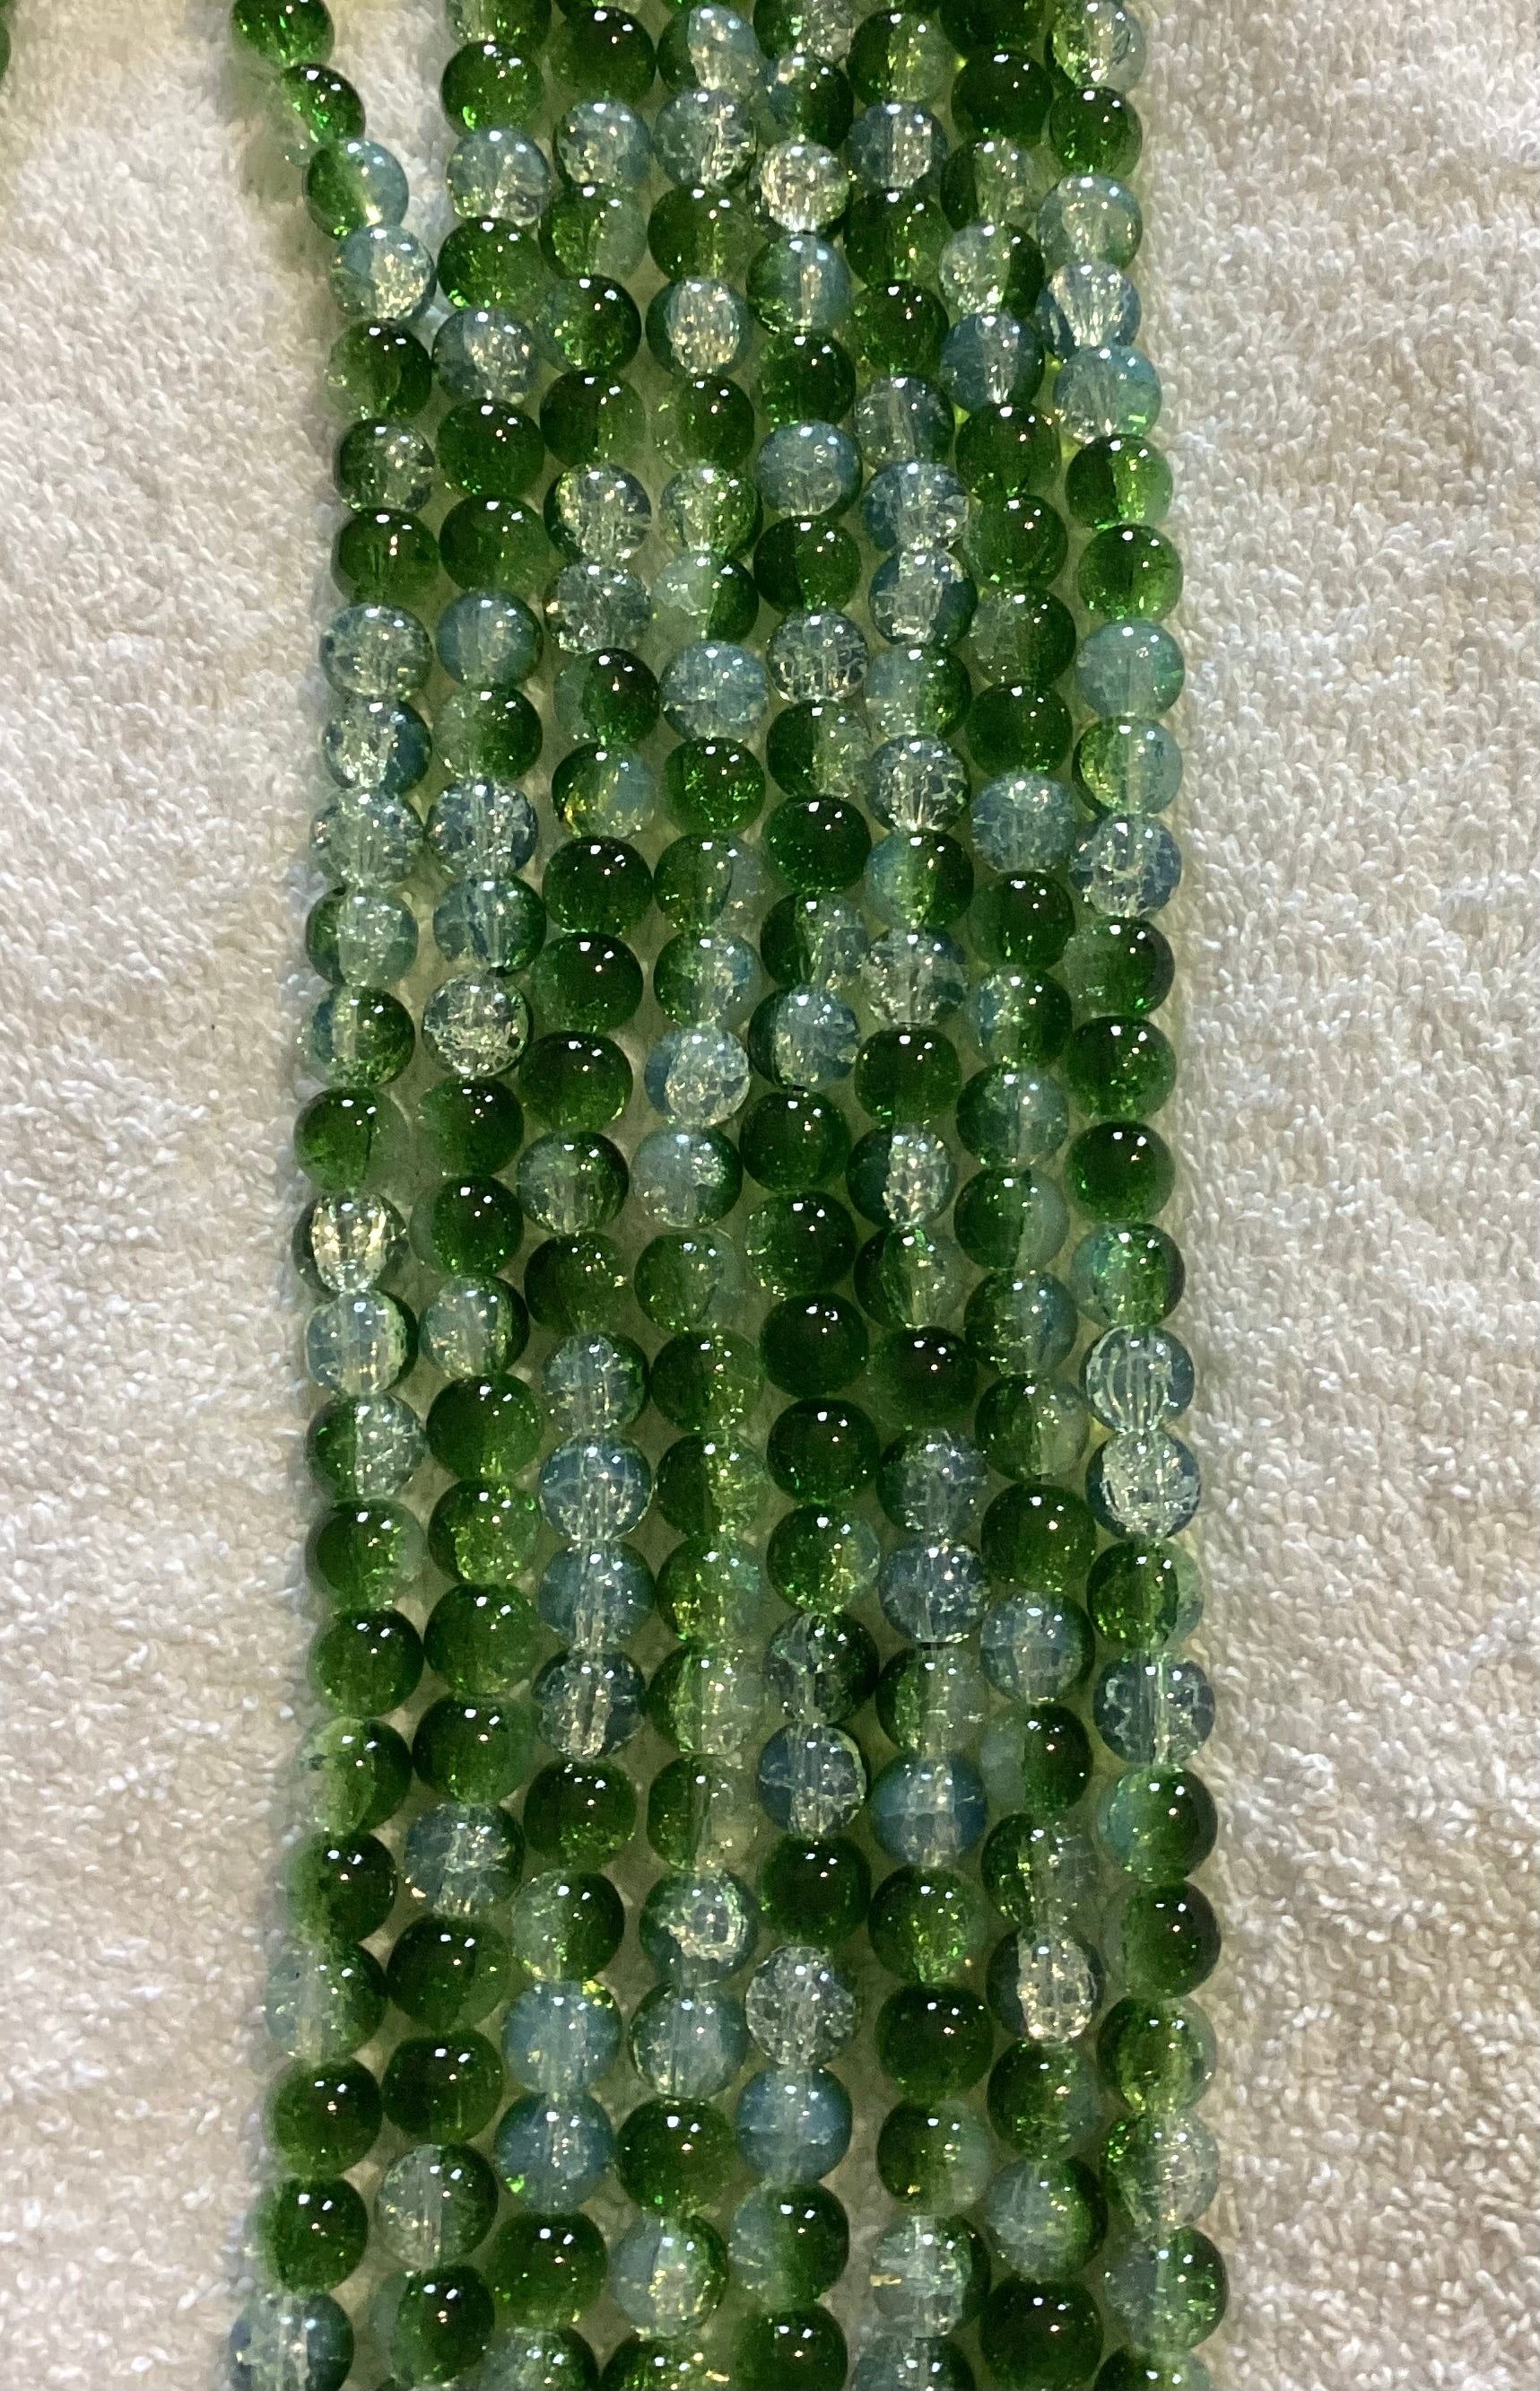 10mm Crackle Beads/Each 40 beads per strand